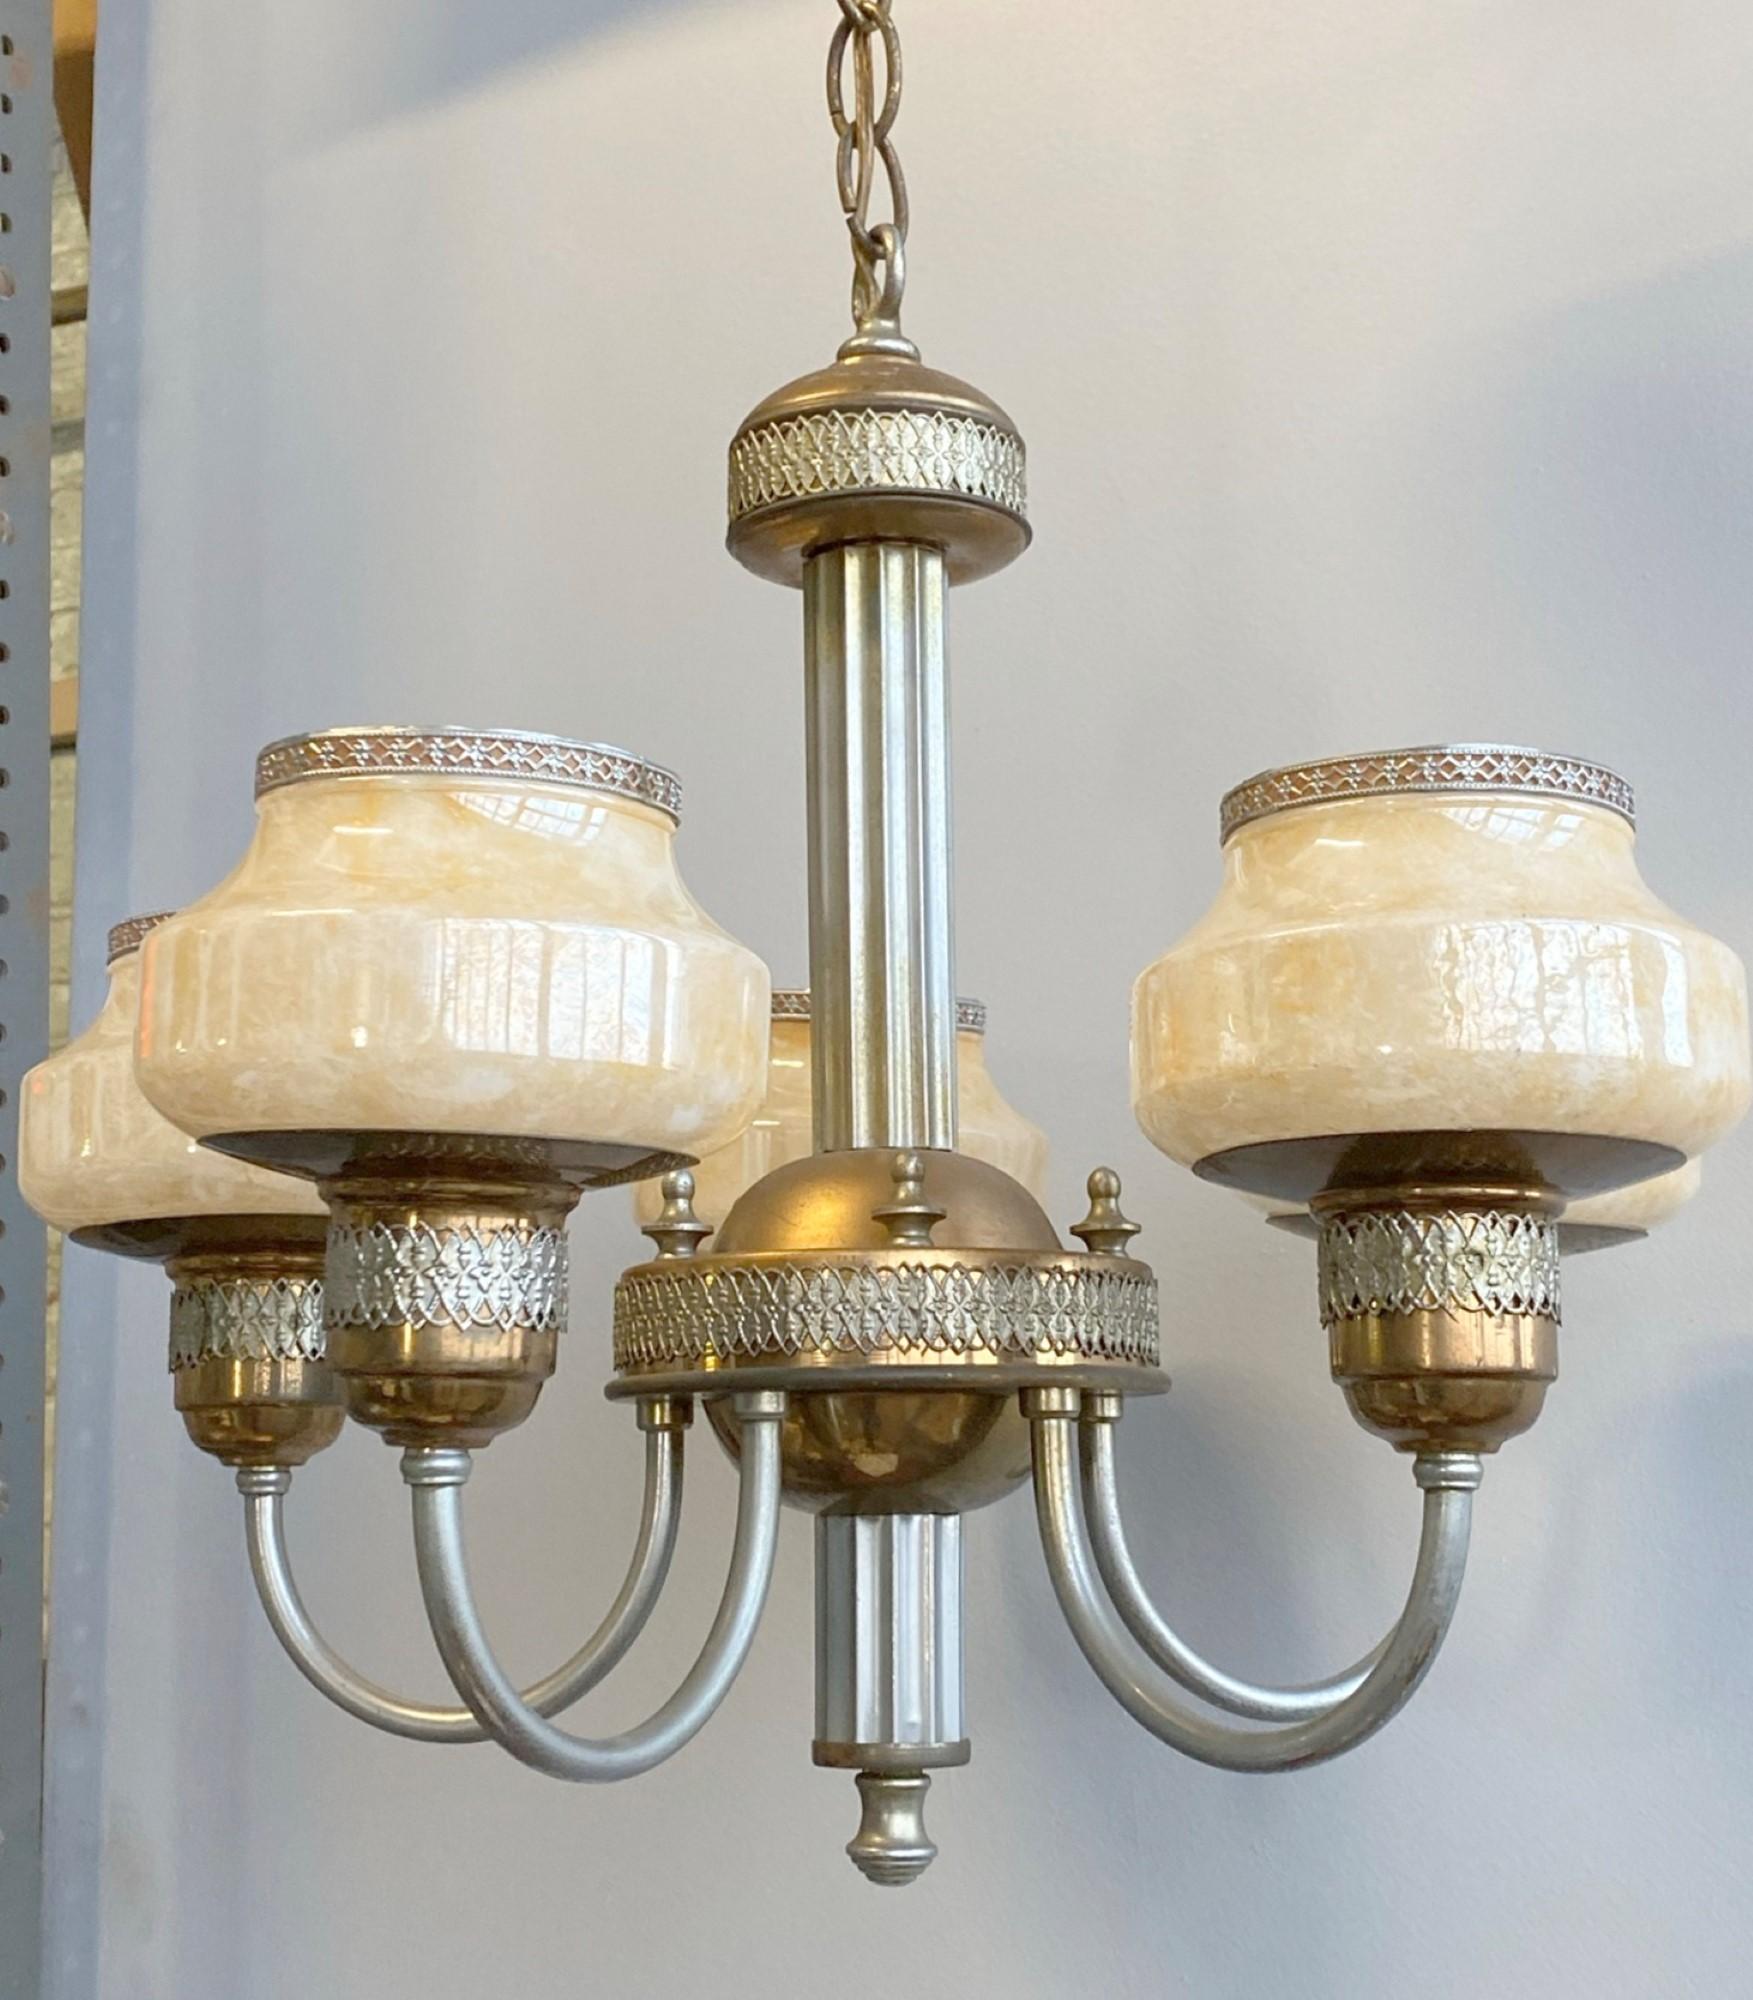 Early 20th century Art Deco five arm chandelier with a copper and nickel plated frame, iridescent honey colored custard glass shades and metal lace-like detail. This can be seen at our 400 Gilligan St location in Scranton, PA.